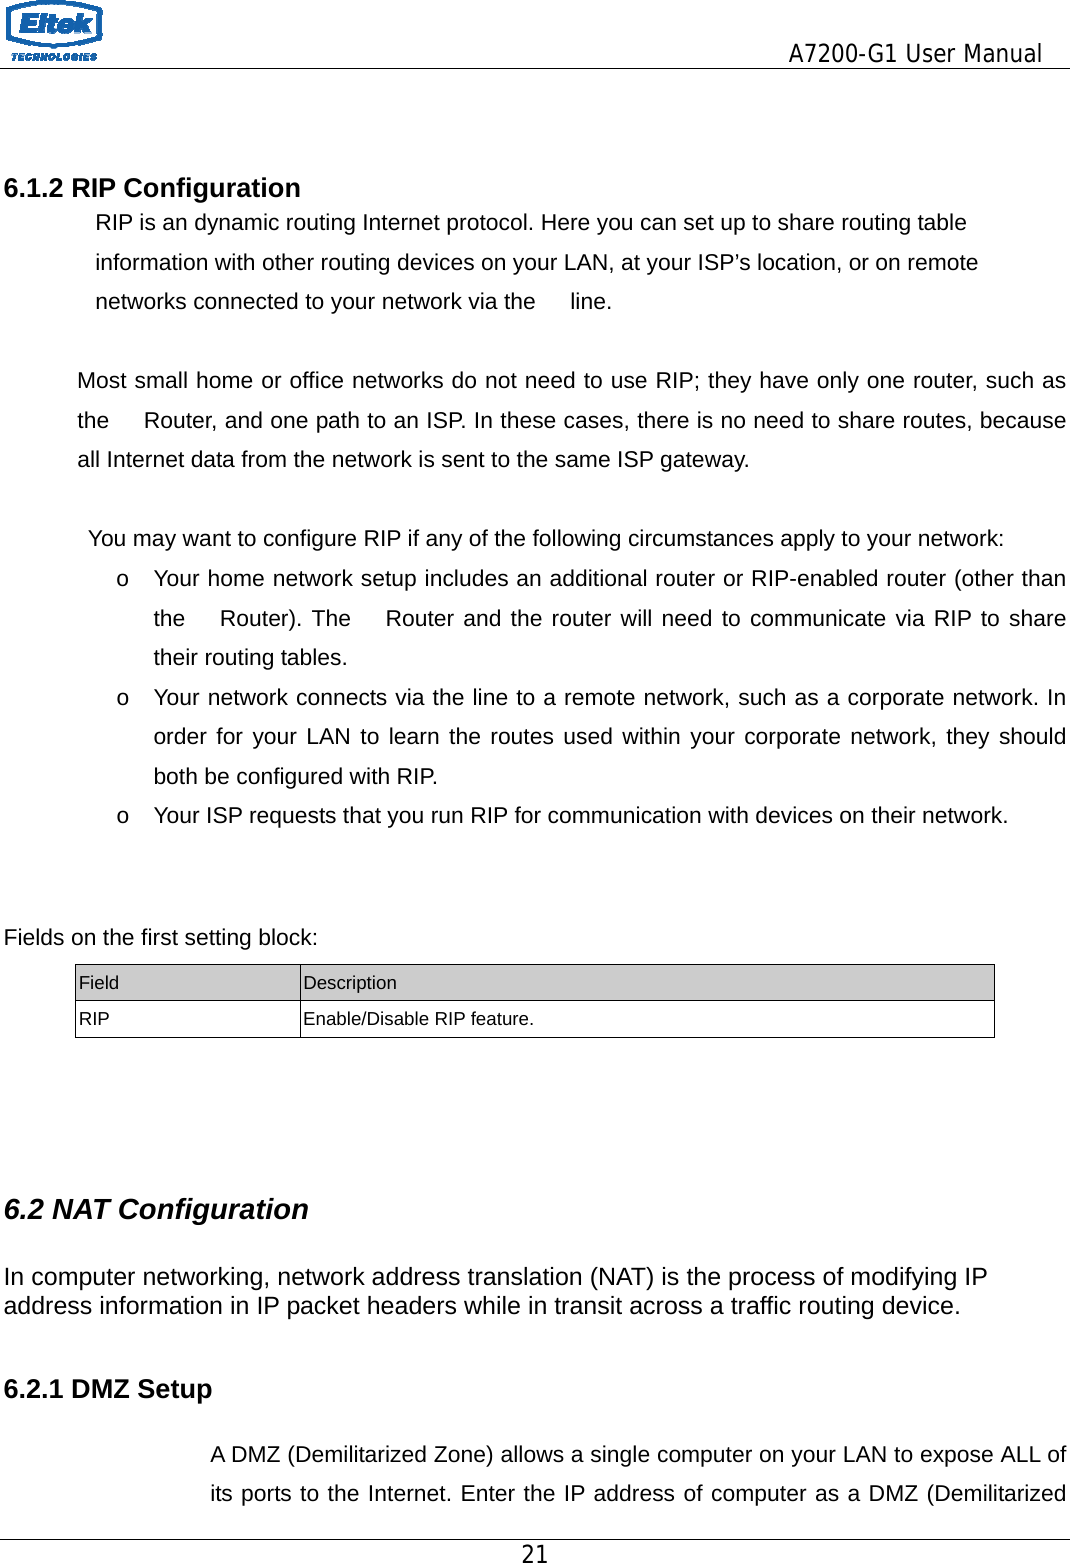                                         A7200-G1 User Manual 21    6.1.2 RIP Configuration                 RIP is an dynamic routing Internet protocol. Here you can set up to share routing table                     information with other routing devices on your LAN, at your ISP’s location, or on remote             networks connected to your network via the   line.  Most small home or office networks do not need to use RIP; they have only one router, such as the      Router, and one path to an ISP. In these cases, there is no need to share routes, because all Internet data from the network is sent to the same ISP gateway.  You may want to configure RIP if any of the following circumstances apply to your network: o  Your home network setup includes an additional router or RIP-enabled router (other than the   Router). The   Router and the router will need to communicate via RIP to share their routing tables. o  Your network connects via the line to a remote network, such as a corporate network. In order for your LAN to learn the routes used within your corporate network, they should both be configured with RIP. o  Your ISP requests that you run RIP for communication with devices on their network.   Fields on the first setting block: Field  Description RIP Enable/Disable RIP feature.    6.2 NAT Configuration  In computer networking, network address translation (NAT) is the process of modifying IP address information in IP packet headers while in transit across a traffic routing device.  6.2.1 DMZ Setup  A DMZ (Demilitarized Zone) allows a single computer on your LAN to expose ALL of its ports to the Internet. Enter the IP address of computer as a DMZ (Demilitarized 